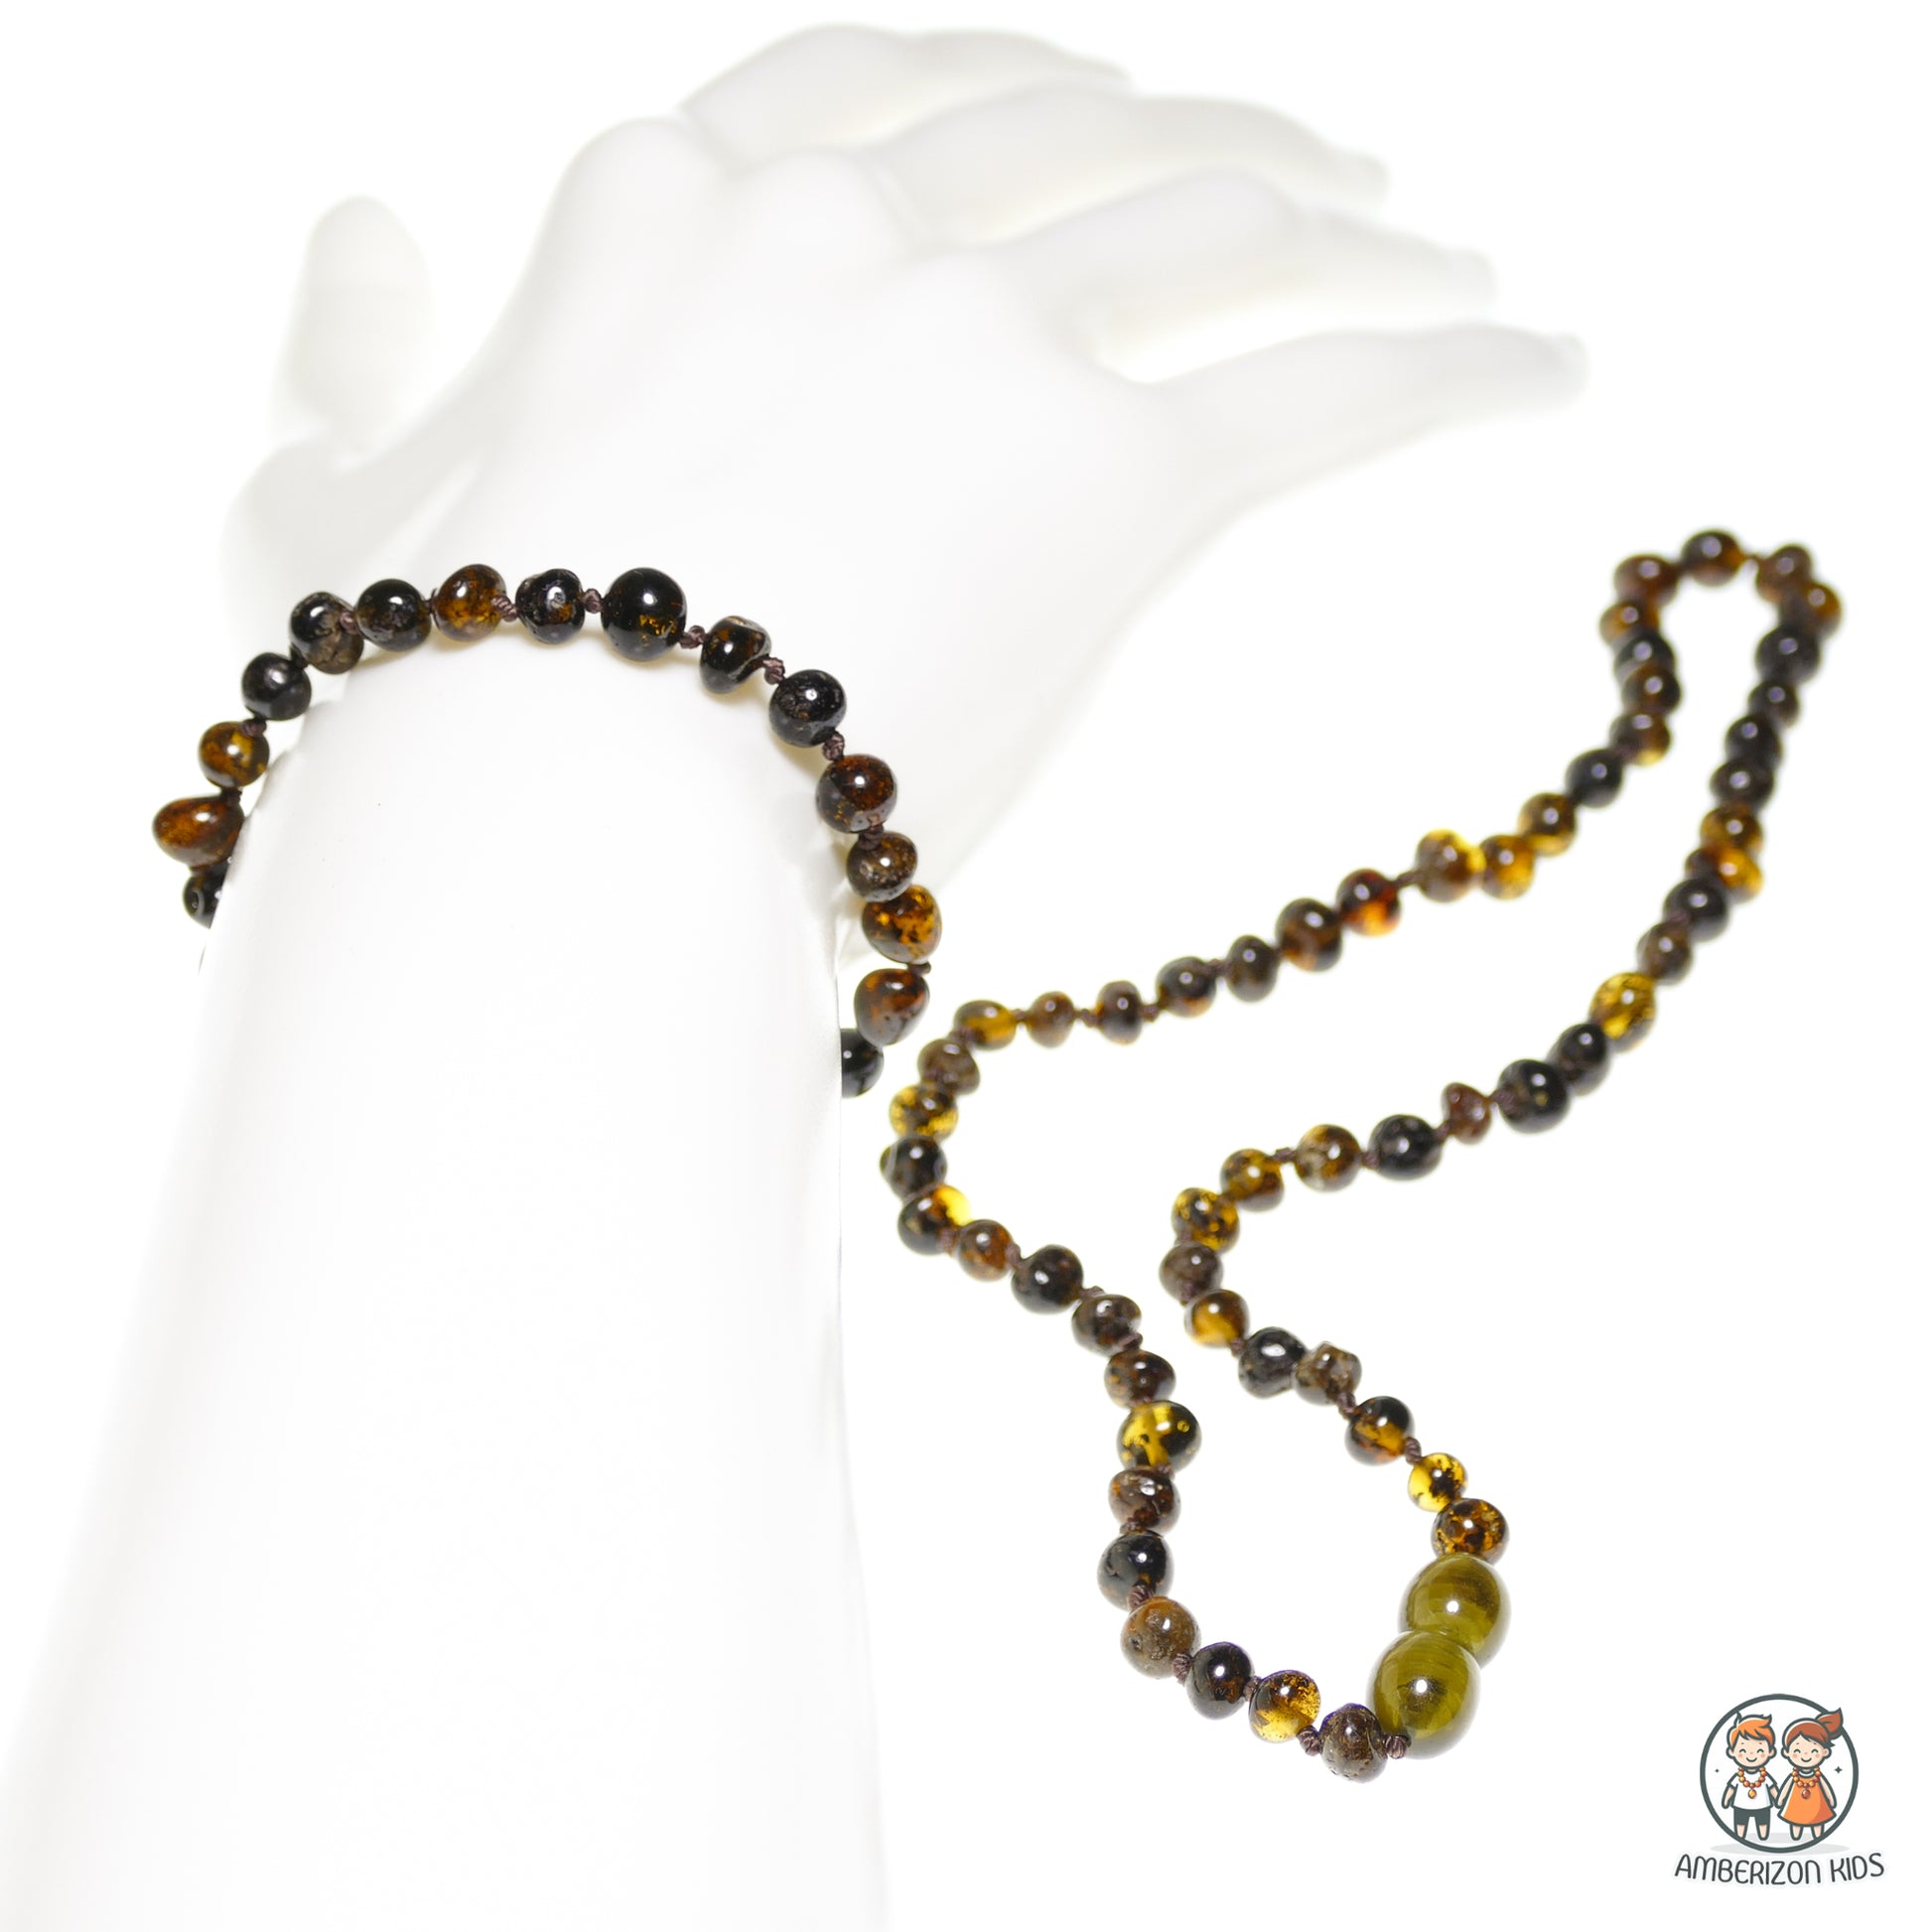 Matching Baby raw amber jewelry set - Grey-green amber color - Baby bracelet + baby necklace